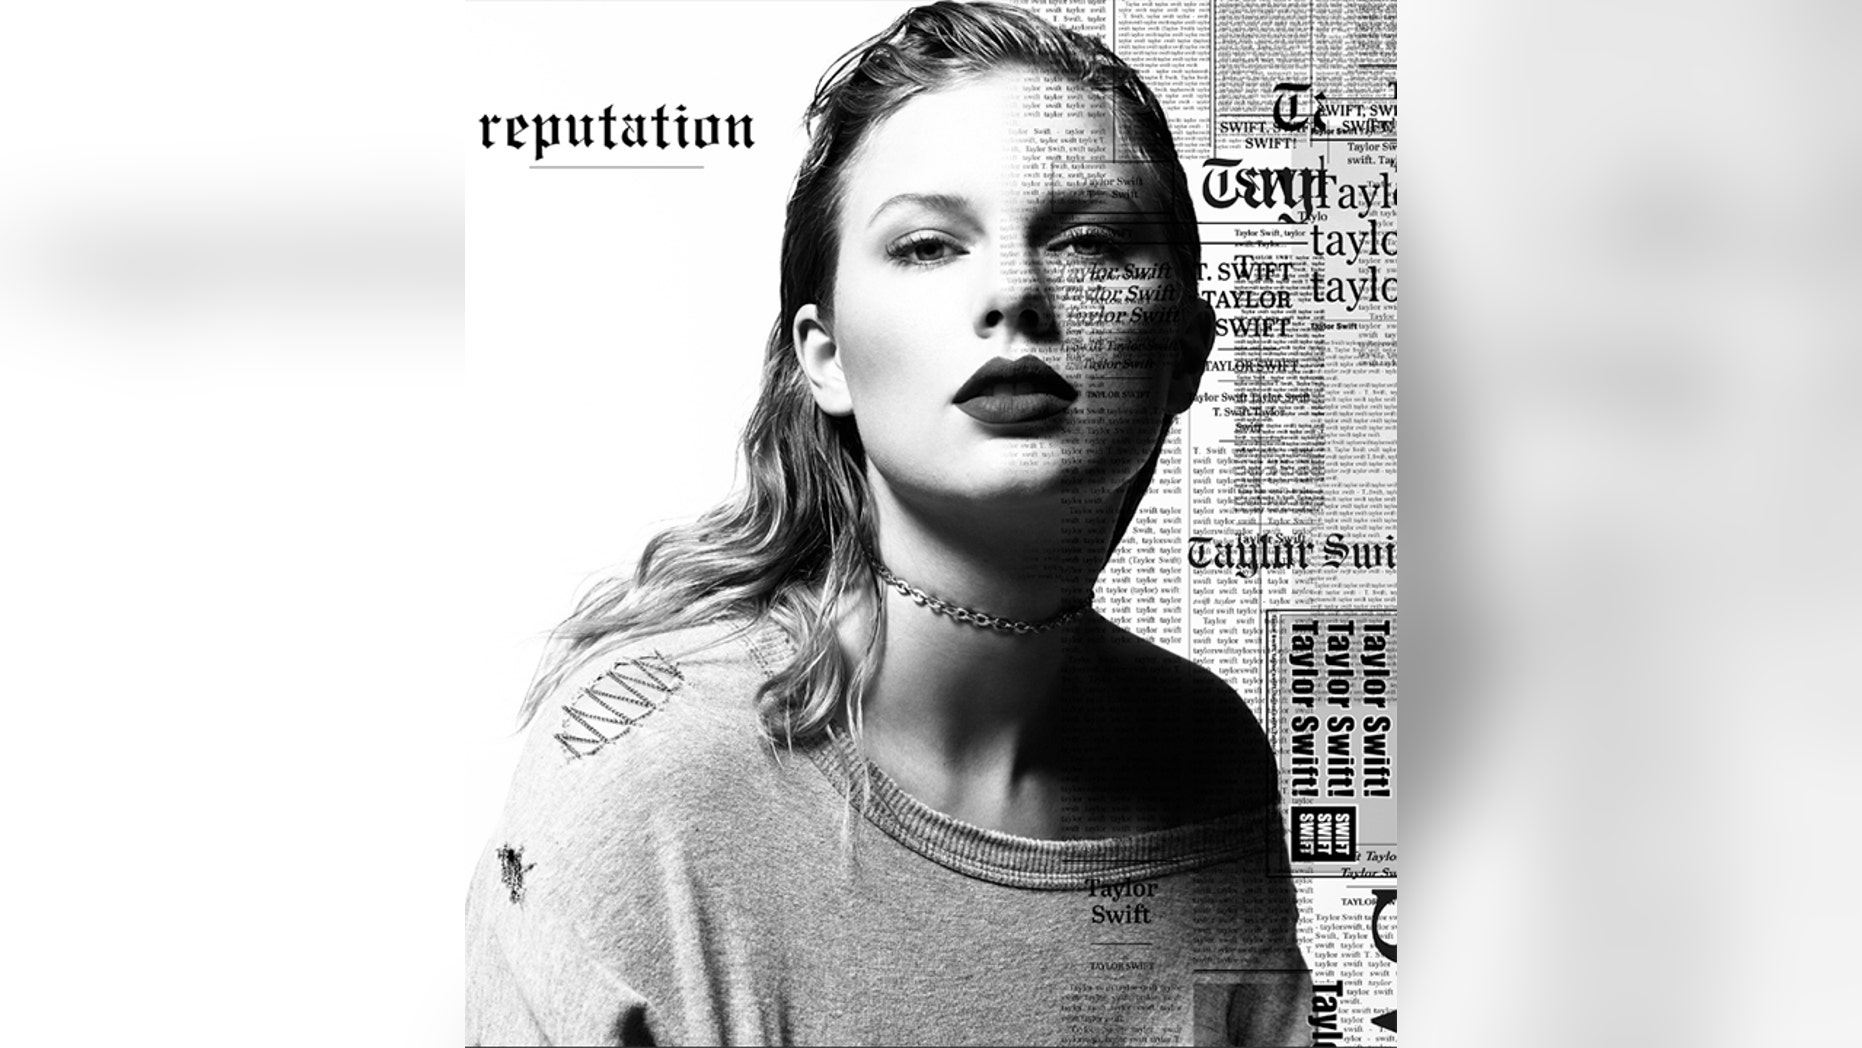 Taylor Swift's 'Reputation' album cover ripped by fans | Fox News1862 x 1048